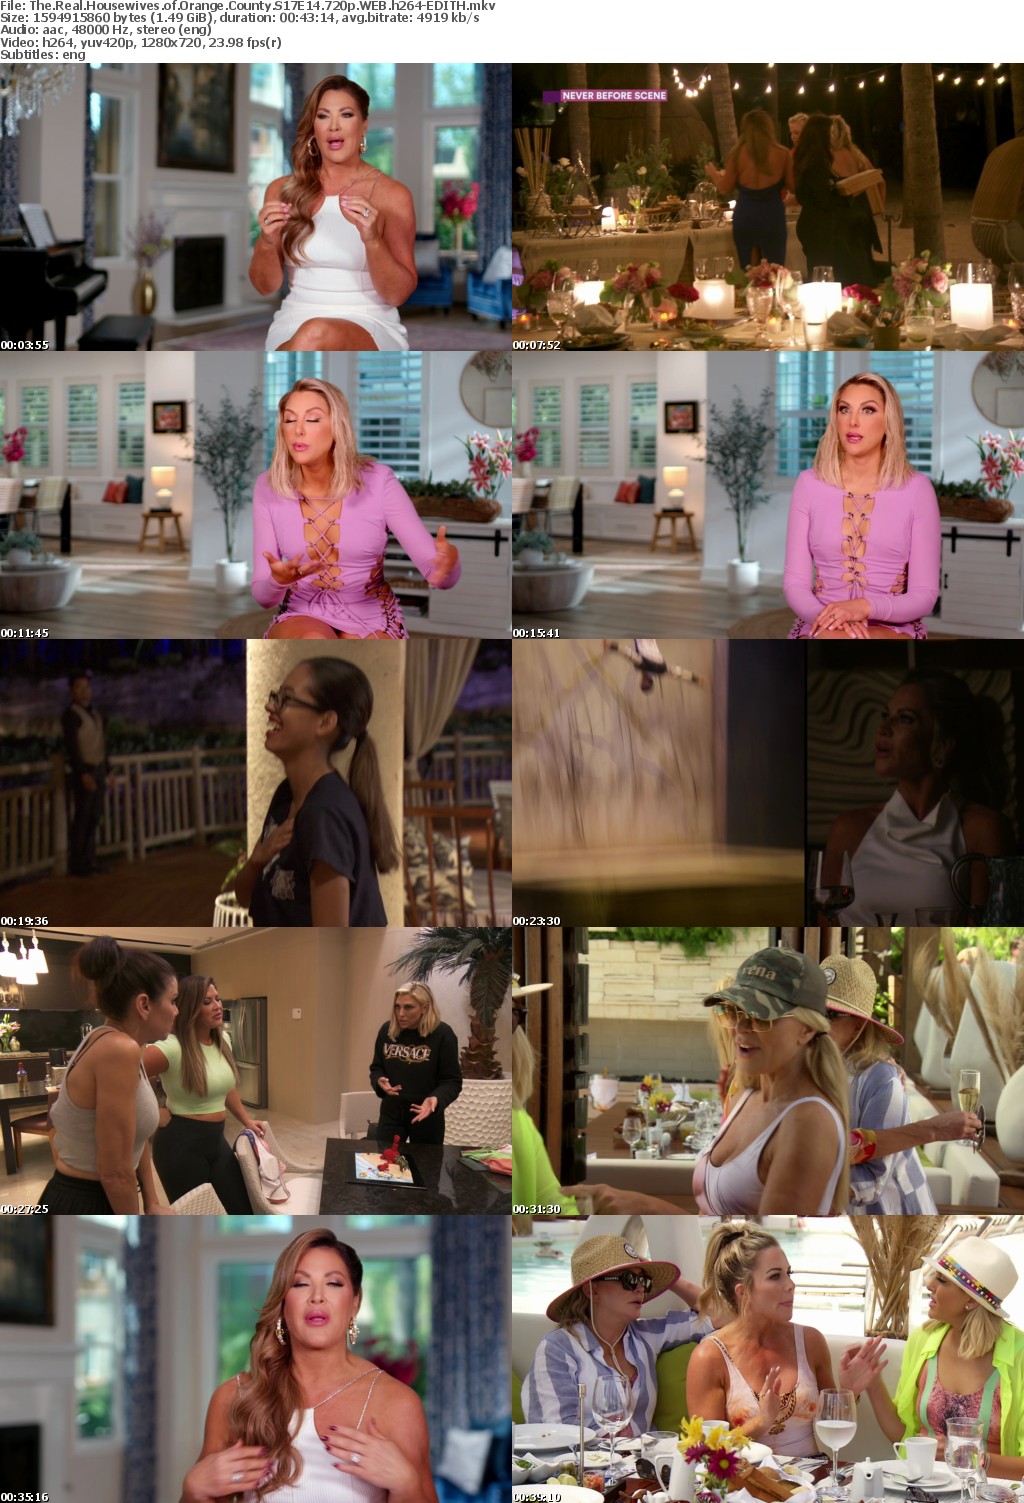 The Real Housewives of Orange County S17E14 720p WEB h264-EDITH